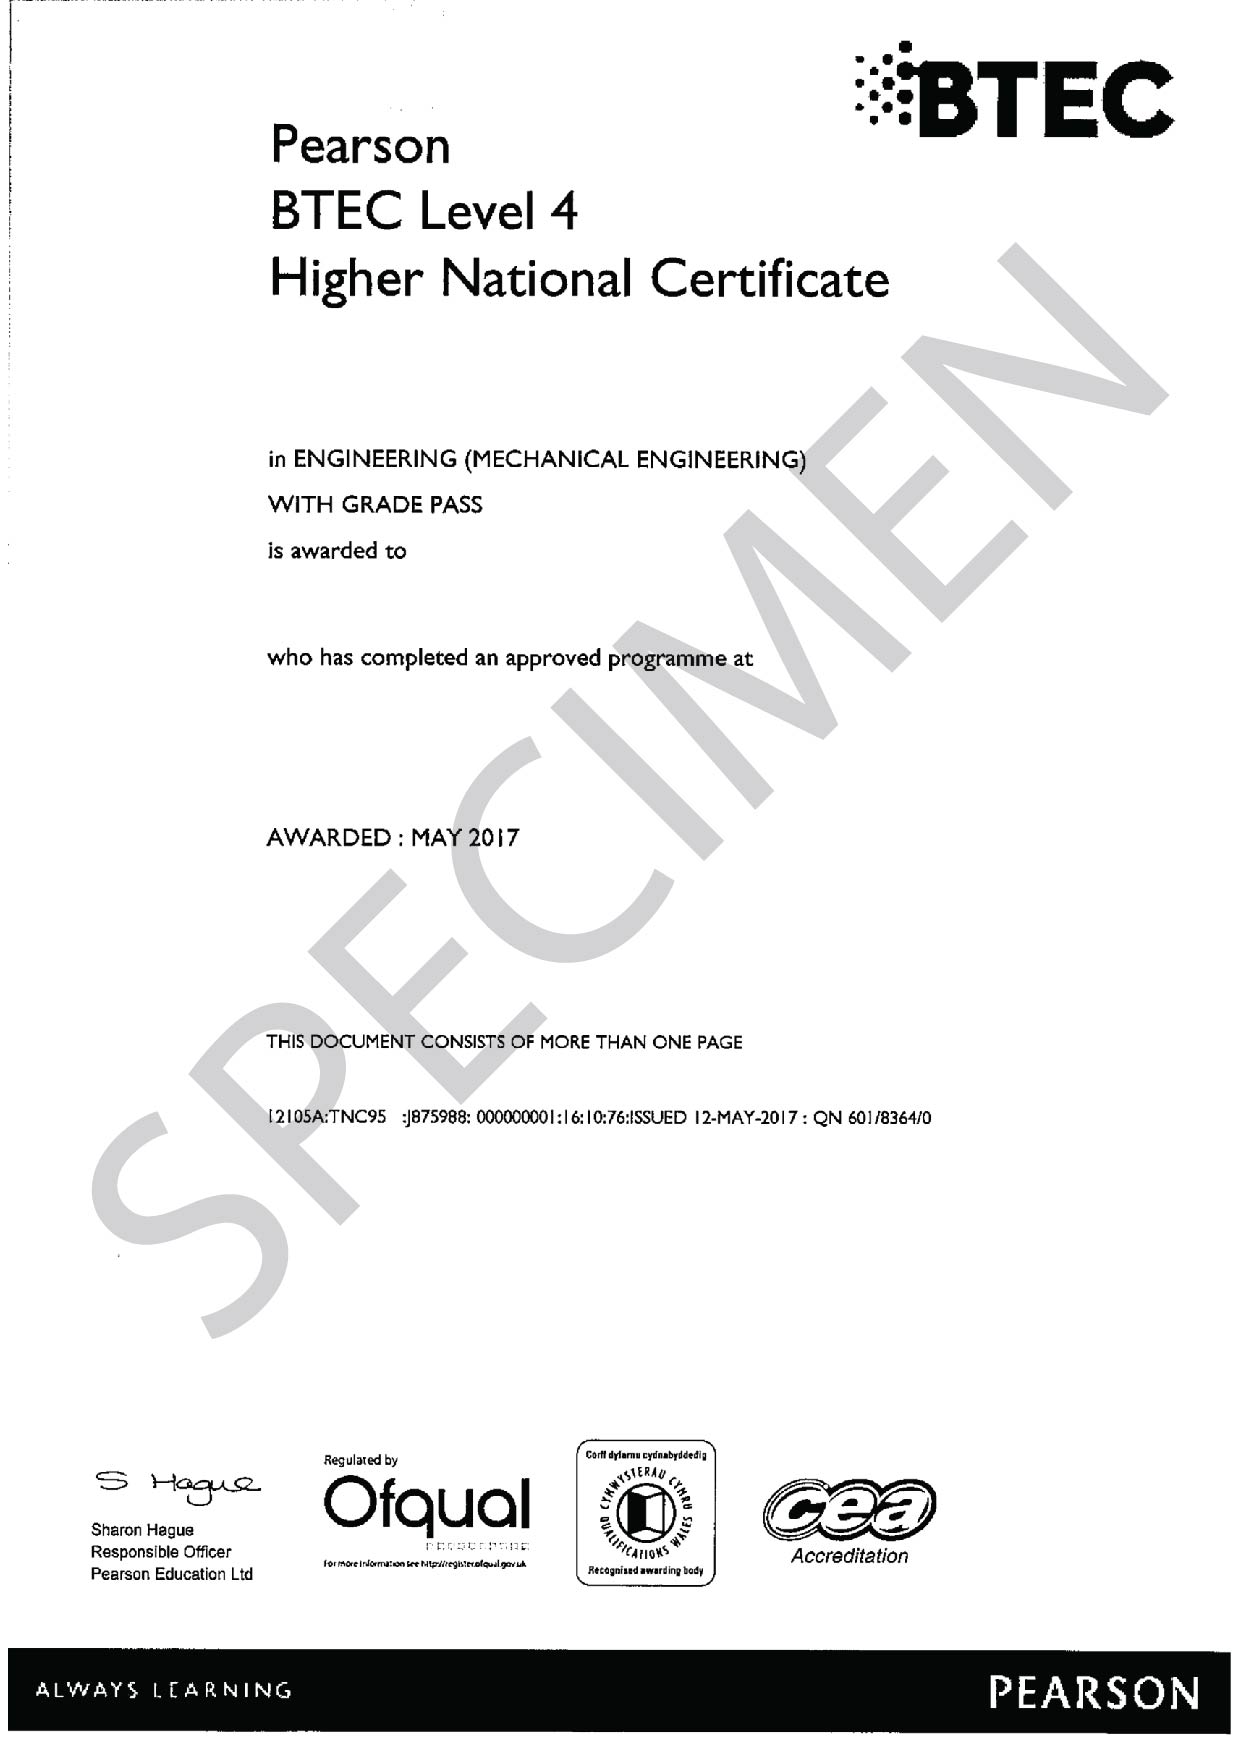 Pearson BTEC Level 4 Higher National Certificate in Engineering